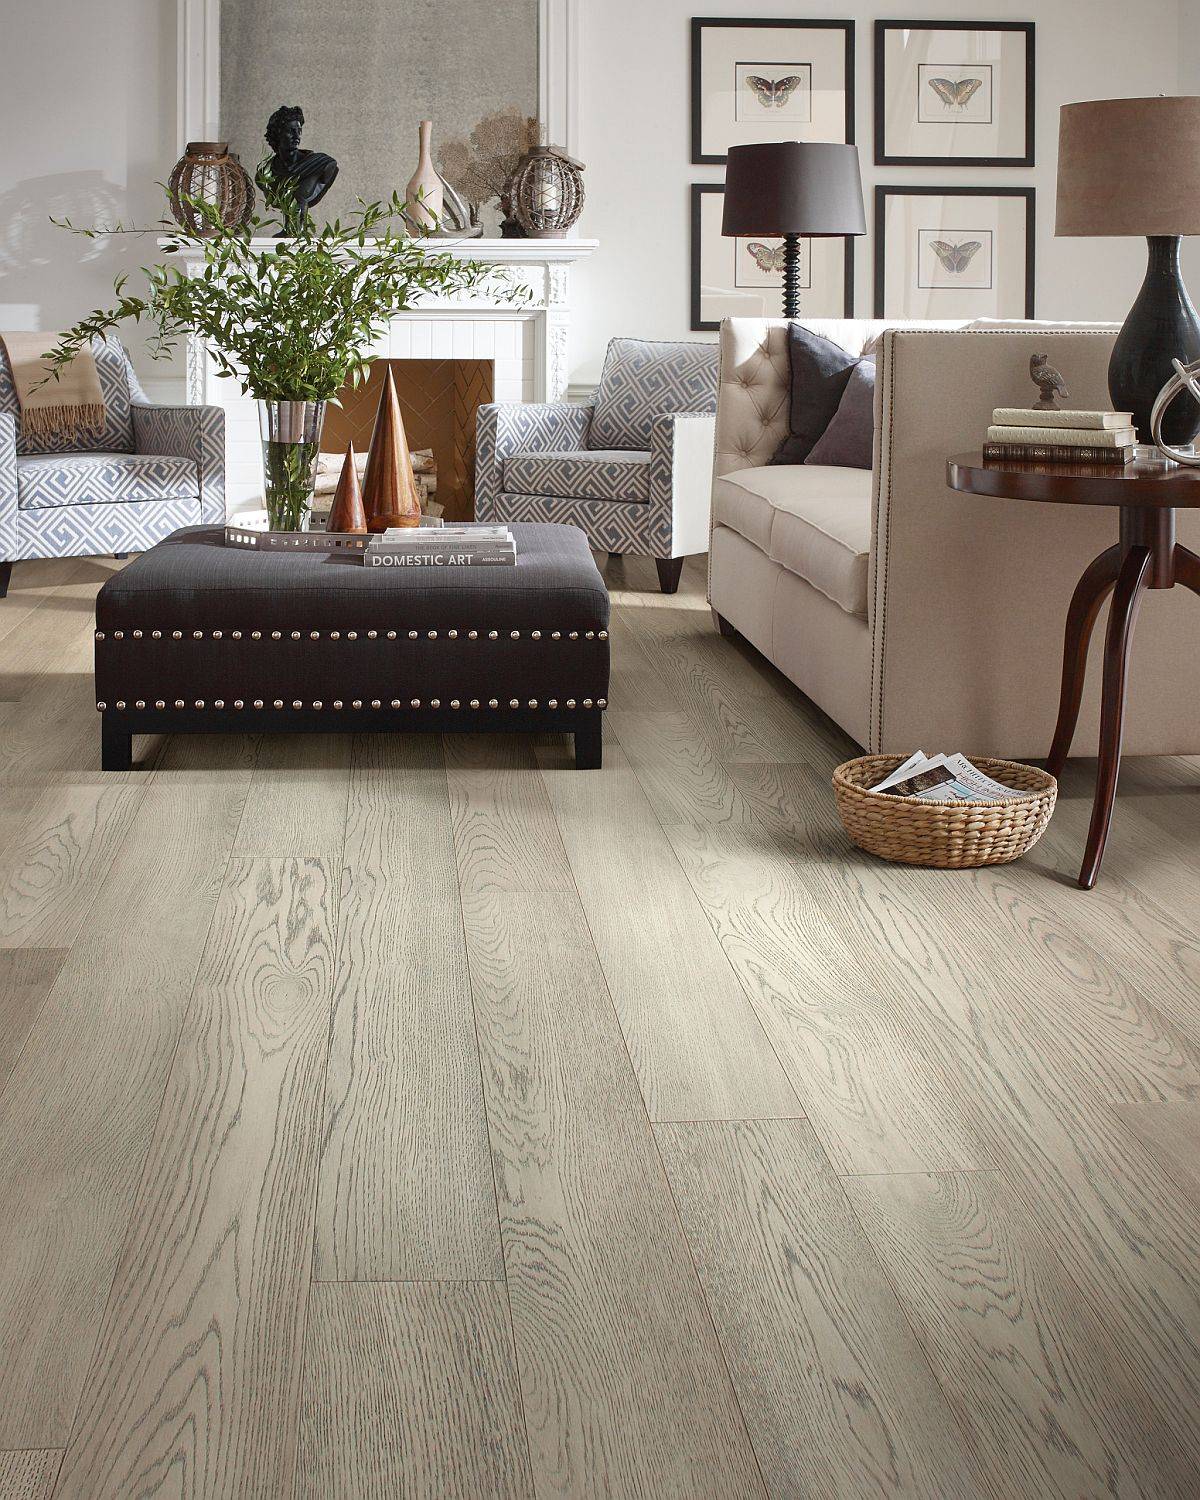 Wood-flooring-with-a-hint-of-gray-is-a-trendy-choice-this-spring-86398